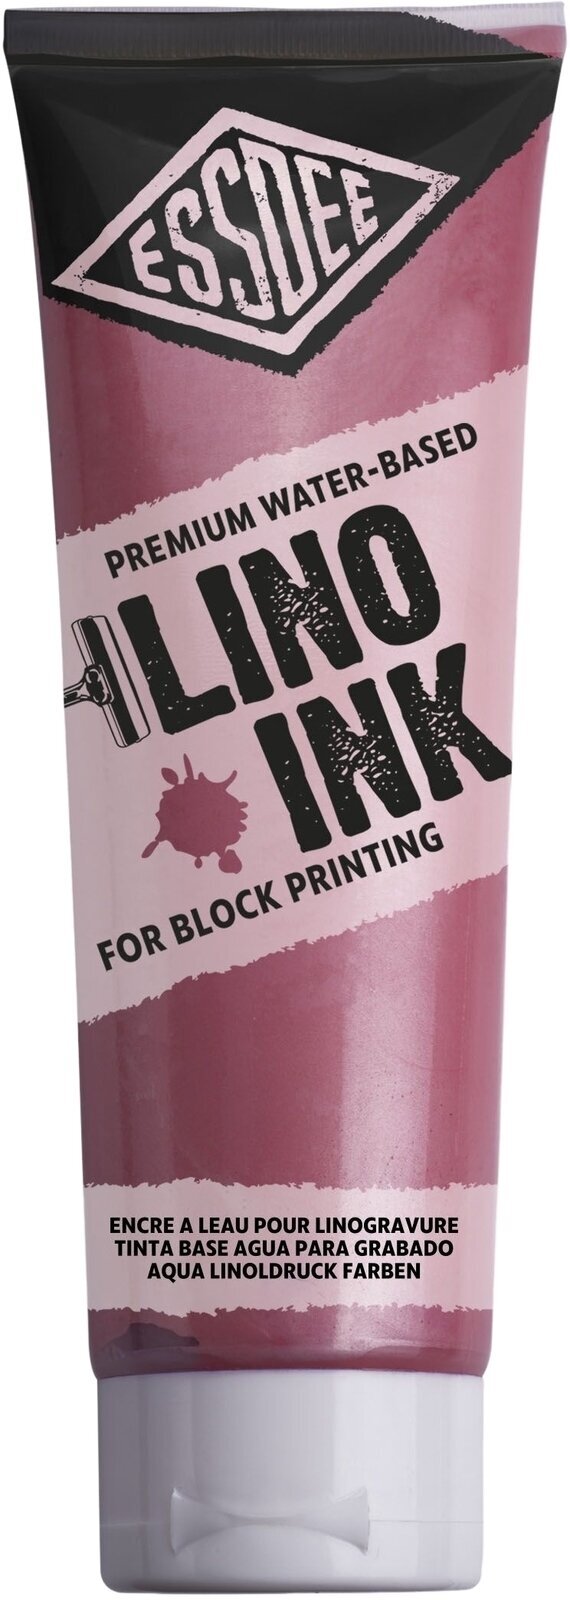 Paint For Linocut Essdee Block Printing Ink Paint For Linocut Pearlescent Pink 300 ml